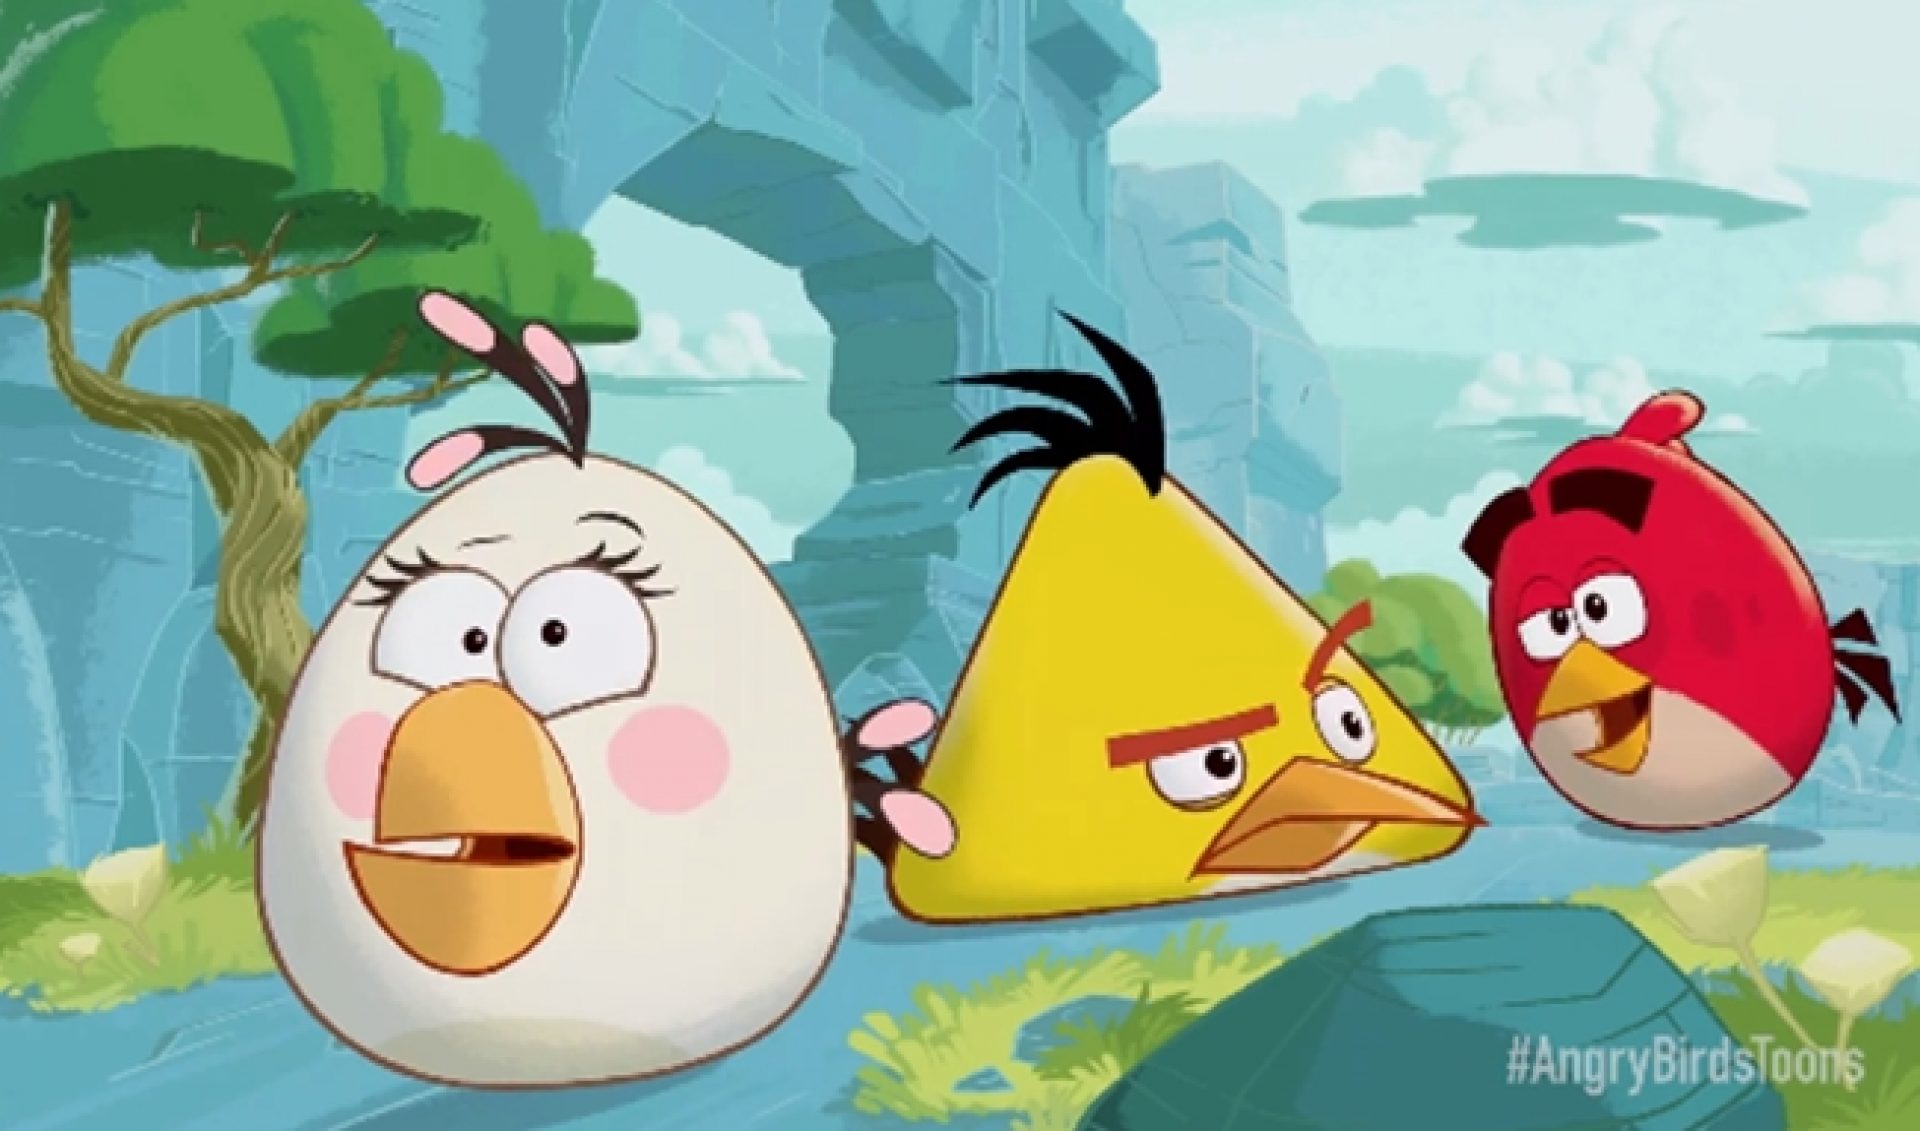 ‘Angry Birds’ To Become YouTube Cartoon